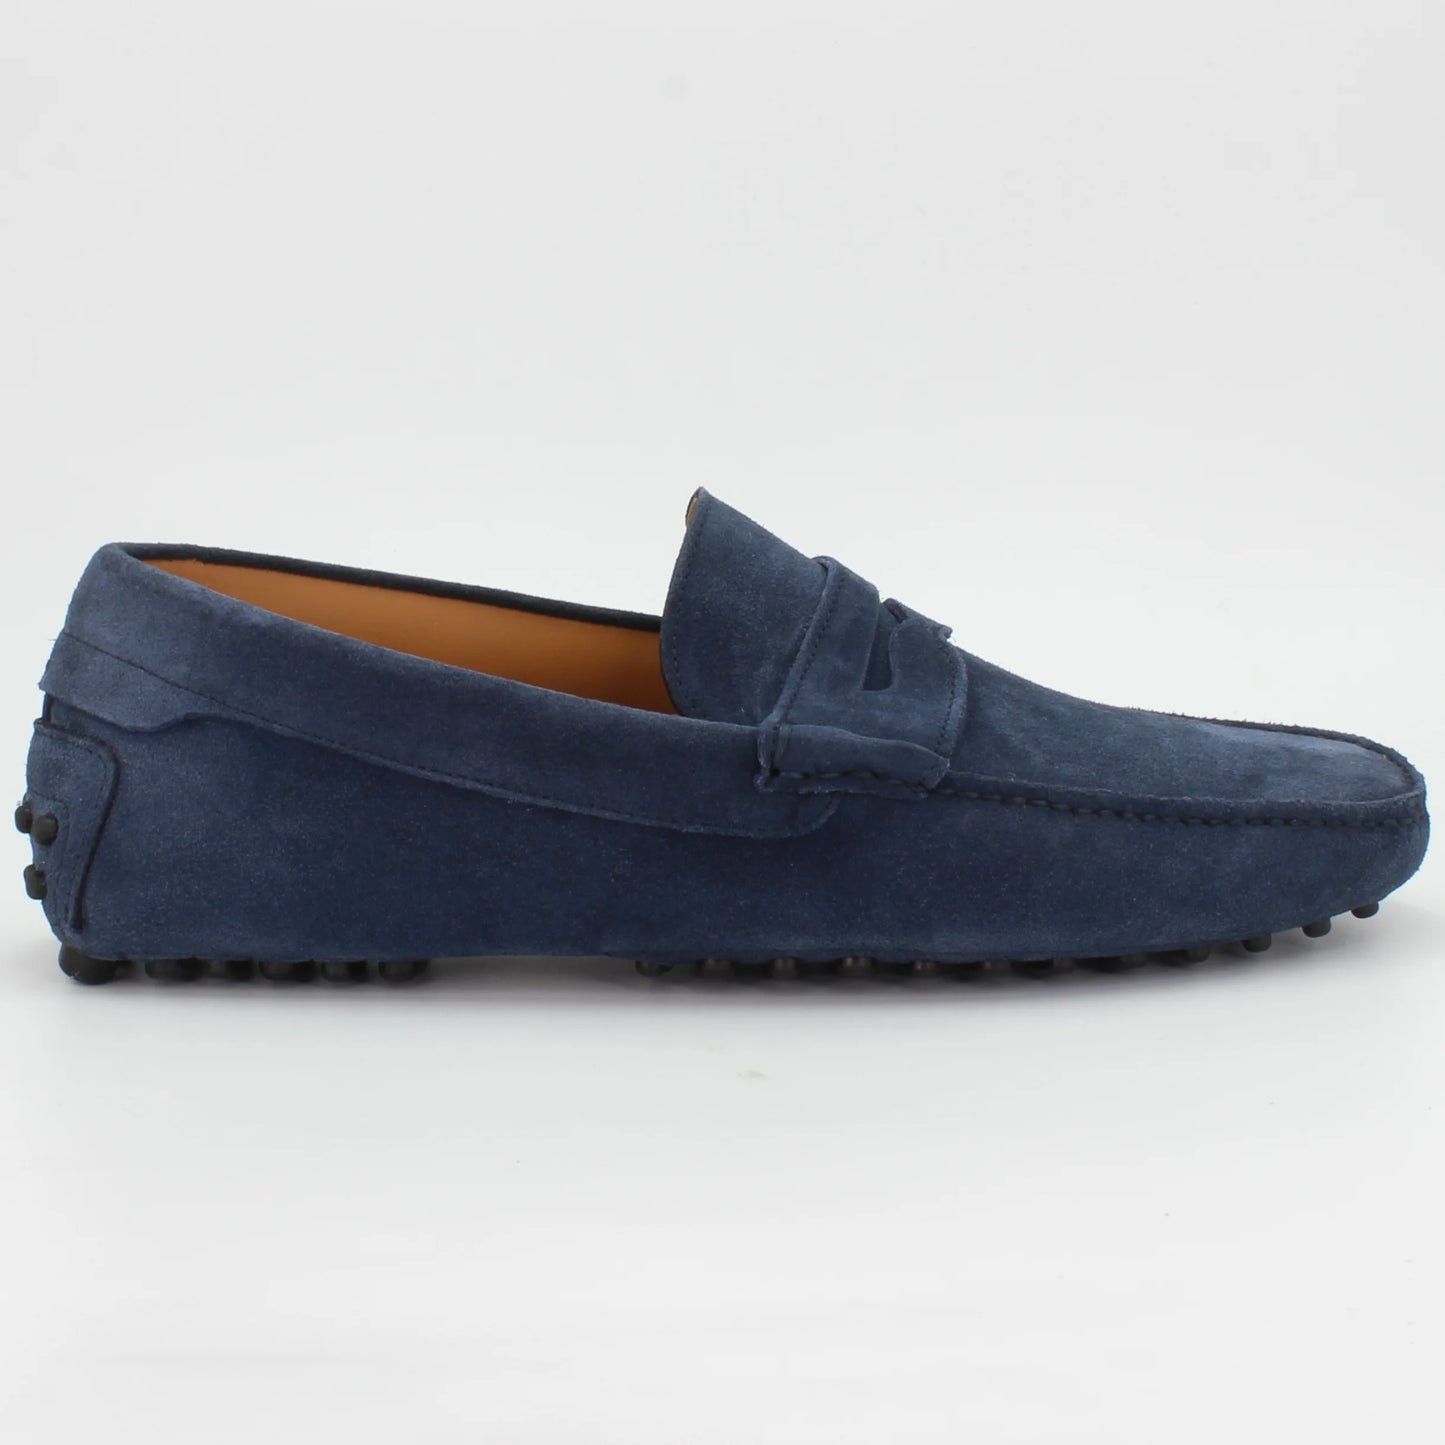 Shop Handmade Italian Leather moccasin in navy velour (UO460002) or browse our range of hand-made Italian shoes for men in leather or suede in-store at Aliverti Cape Town, or shop online. We deliver in South Africa & offer multiple payment plans as well as accept multiple safe & secure payment methods.